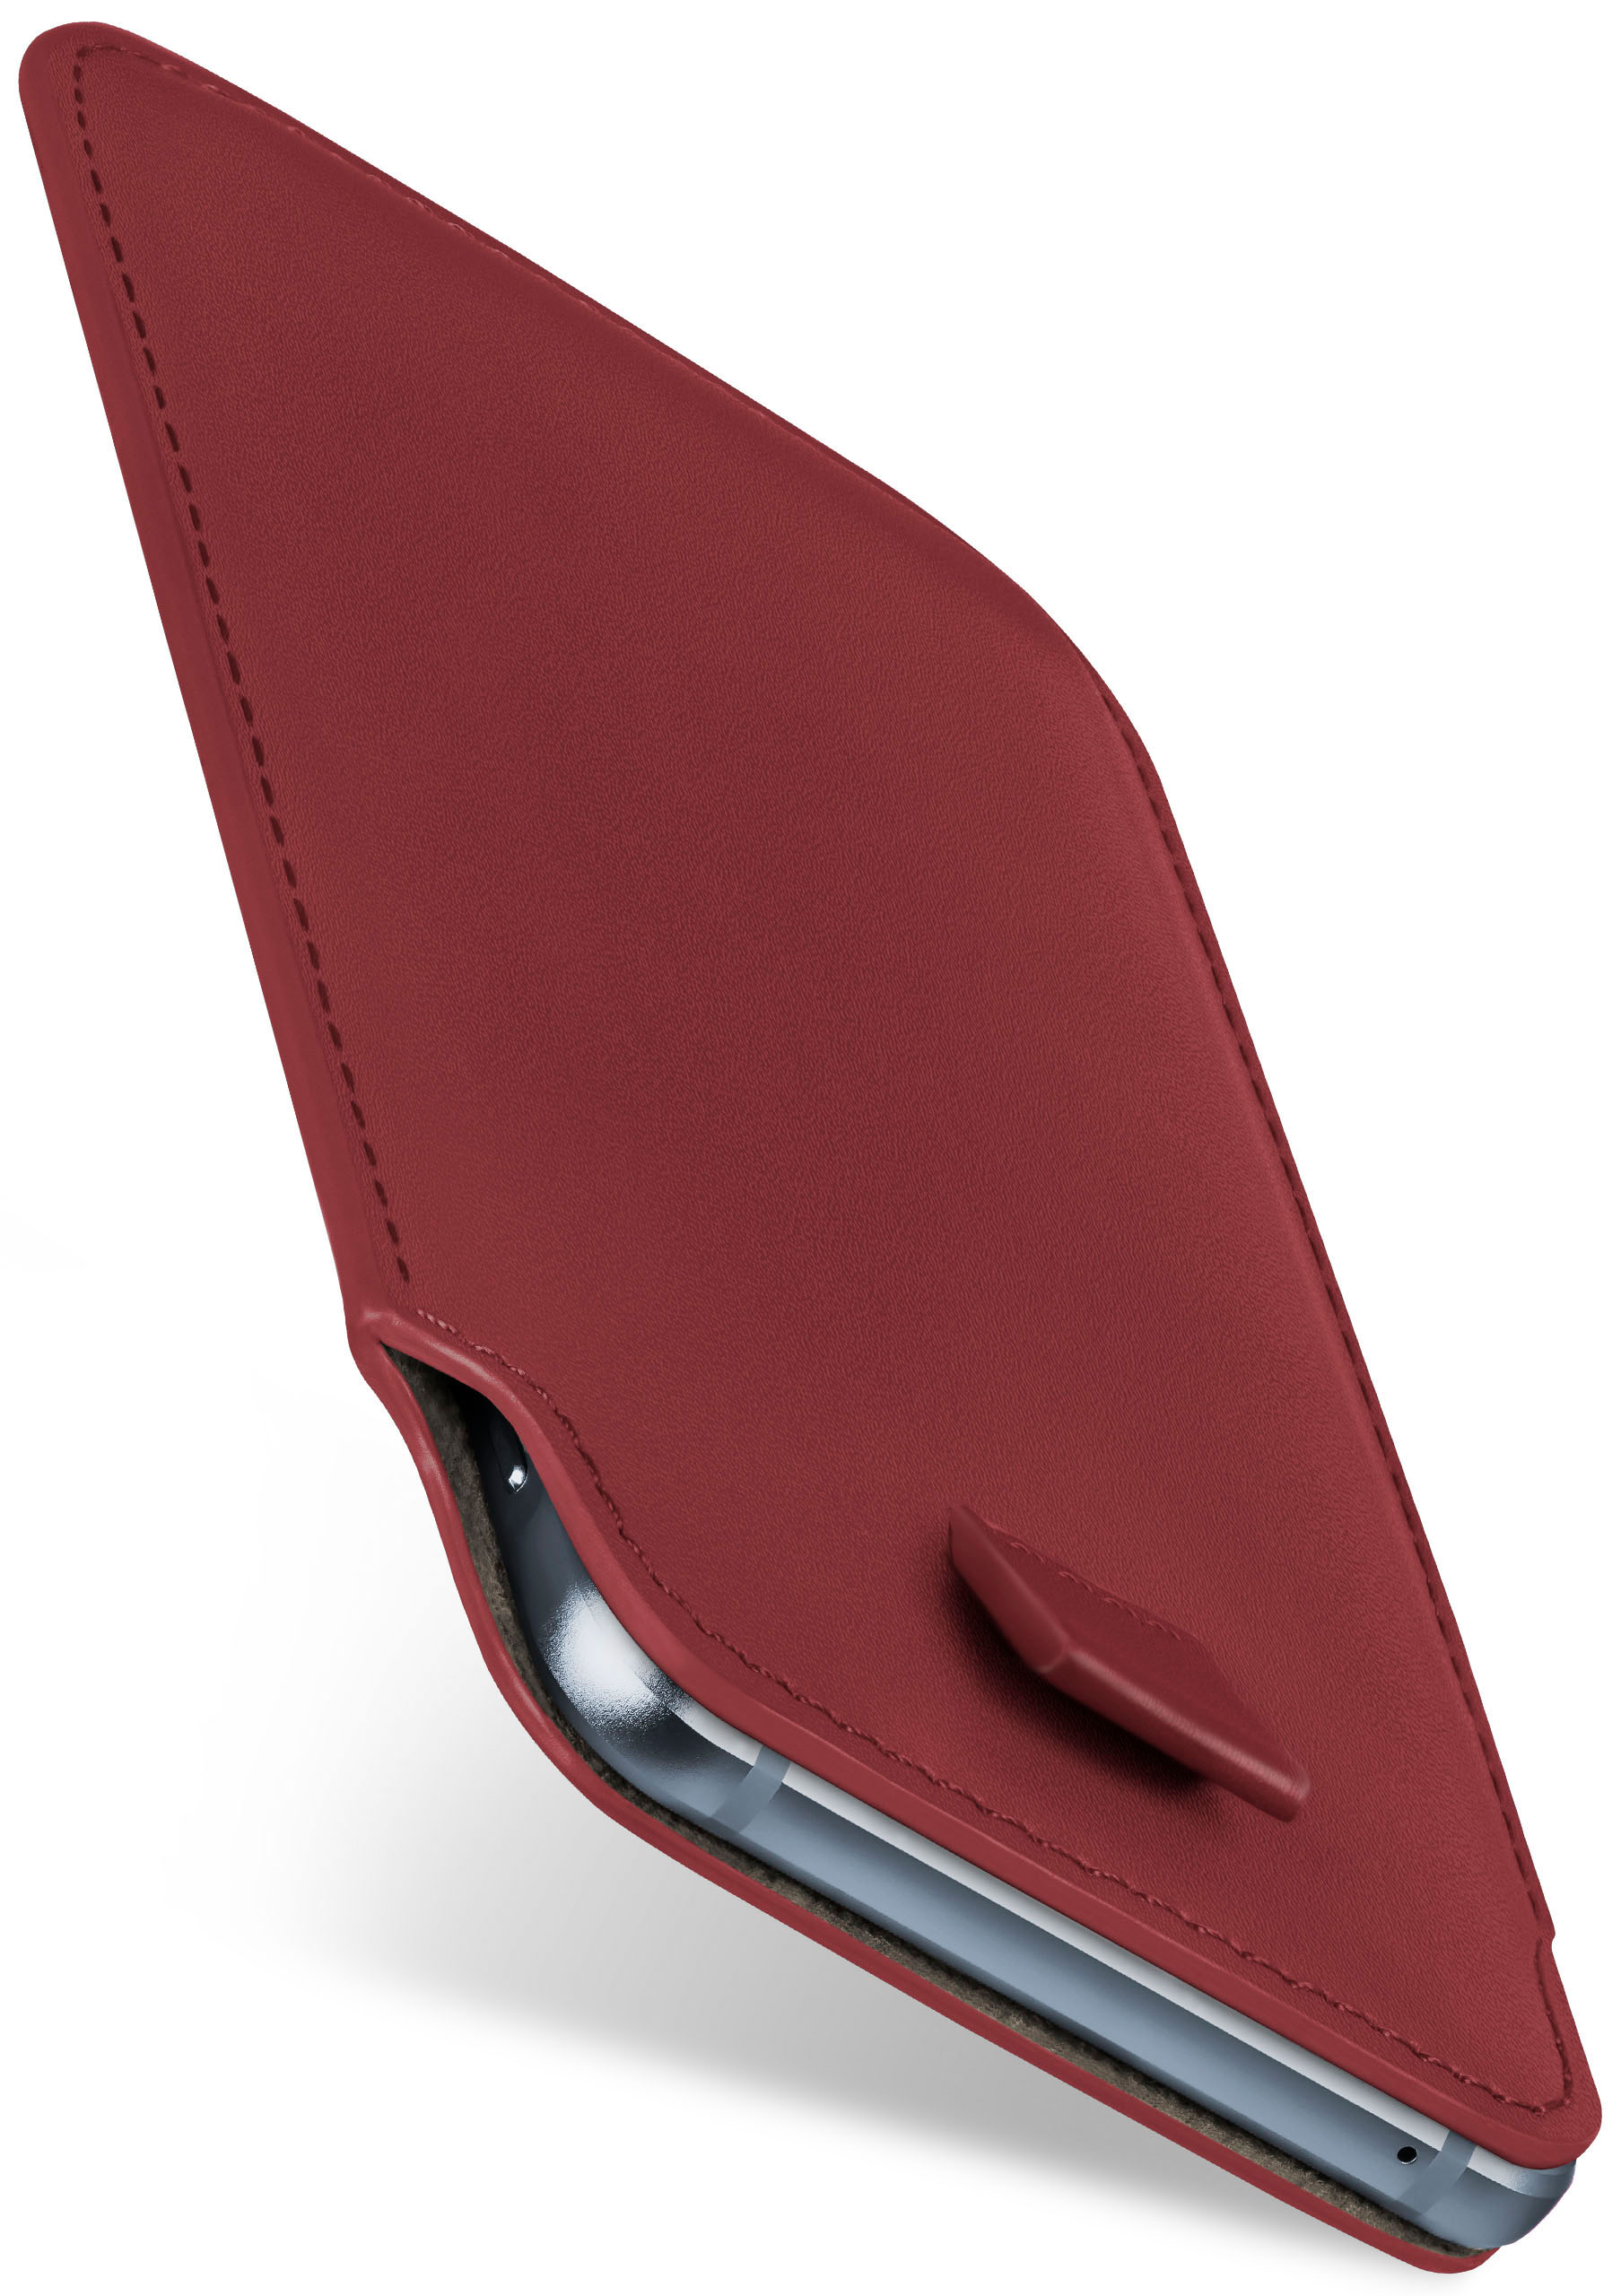 MOEX Slide iPhone Case, Full Cover, XS Apple, Maroon-Red Max